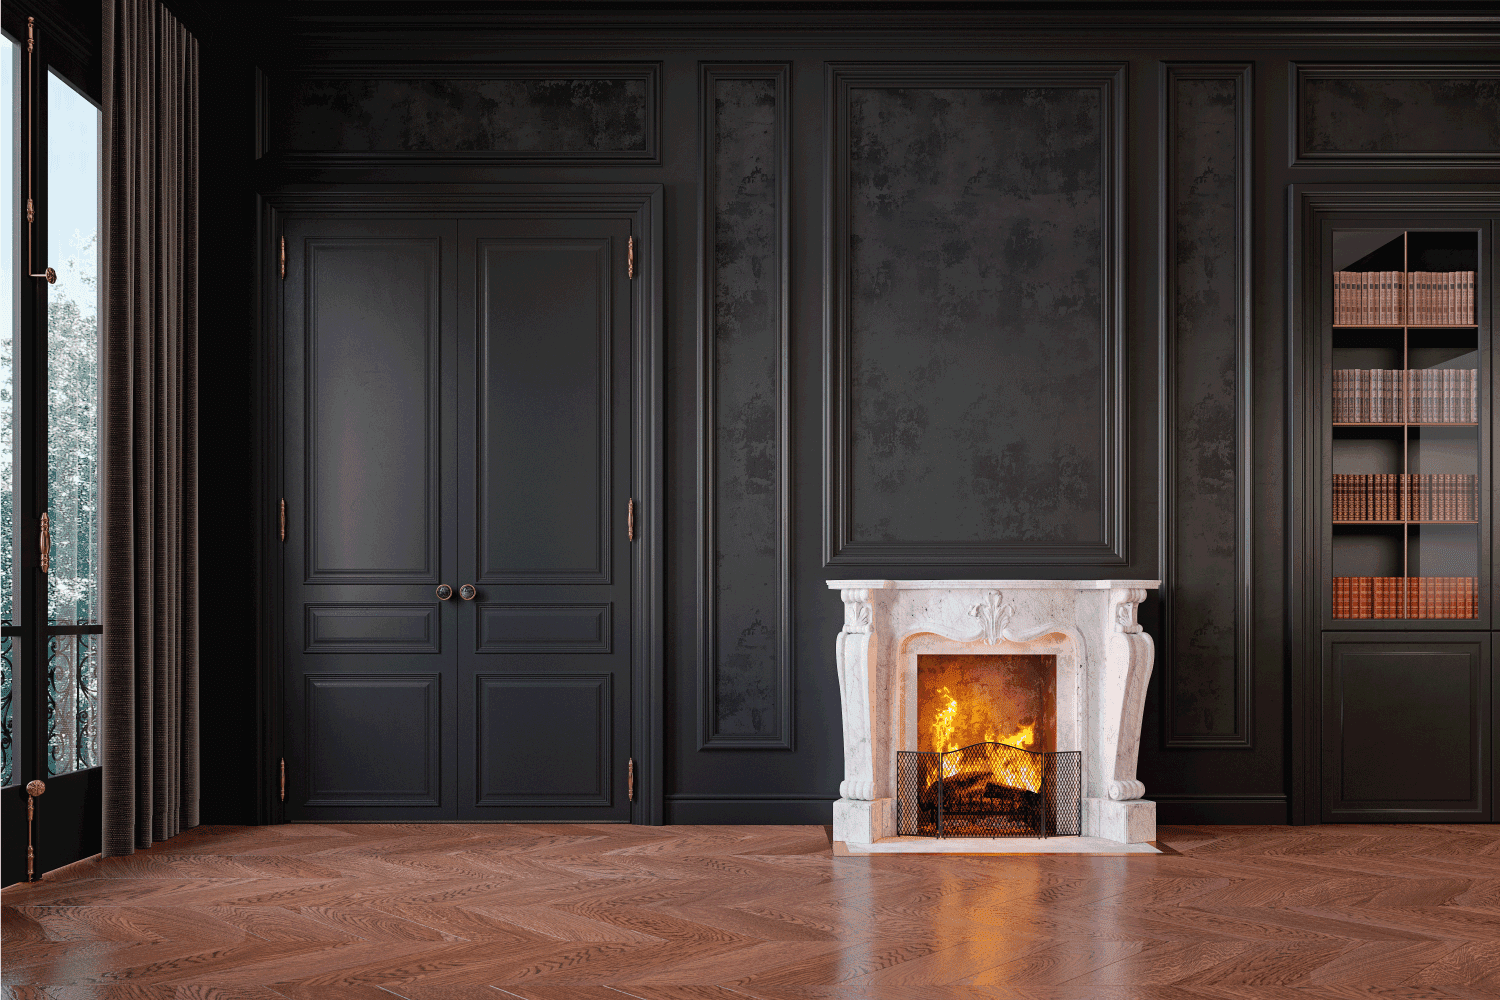 Classic black interior with fireplace, moldings, wall panel, books